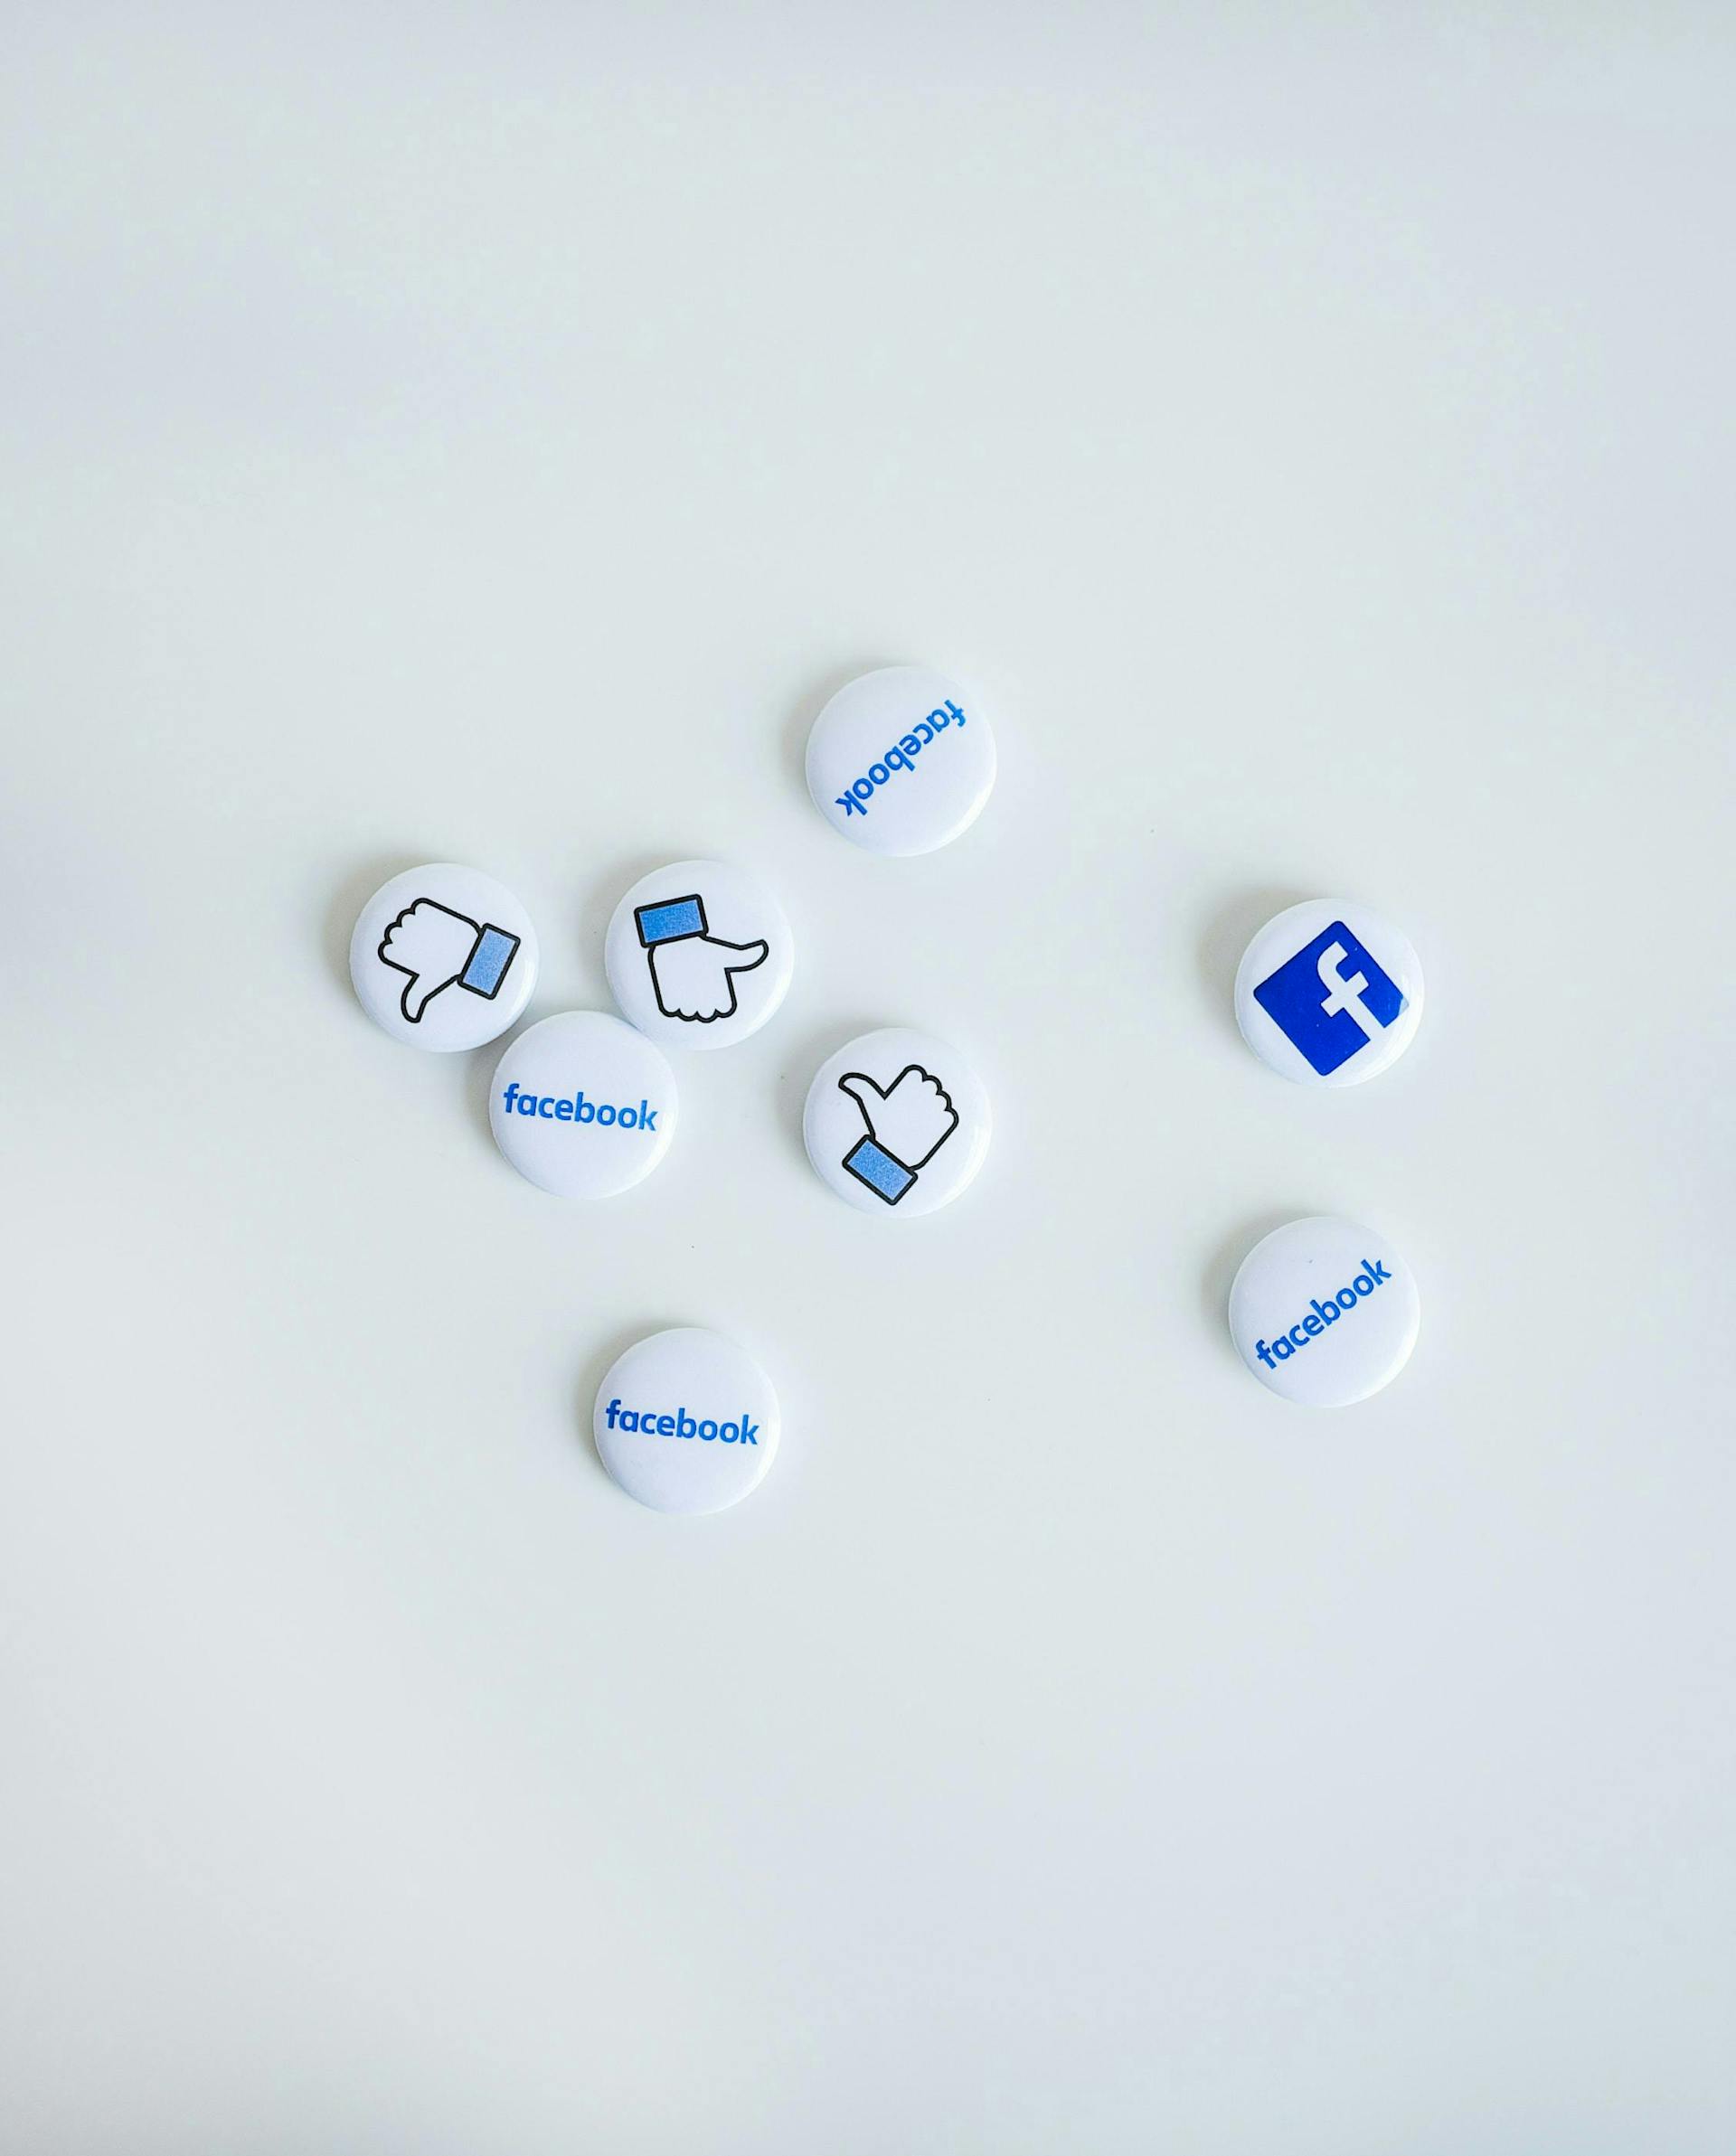 facebook logo and like button on white thumbnails on a white table